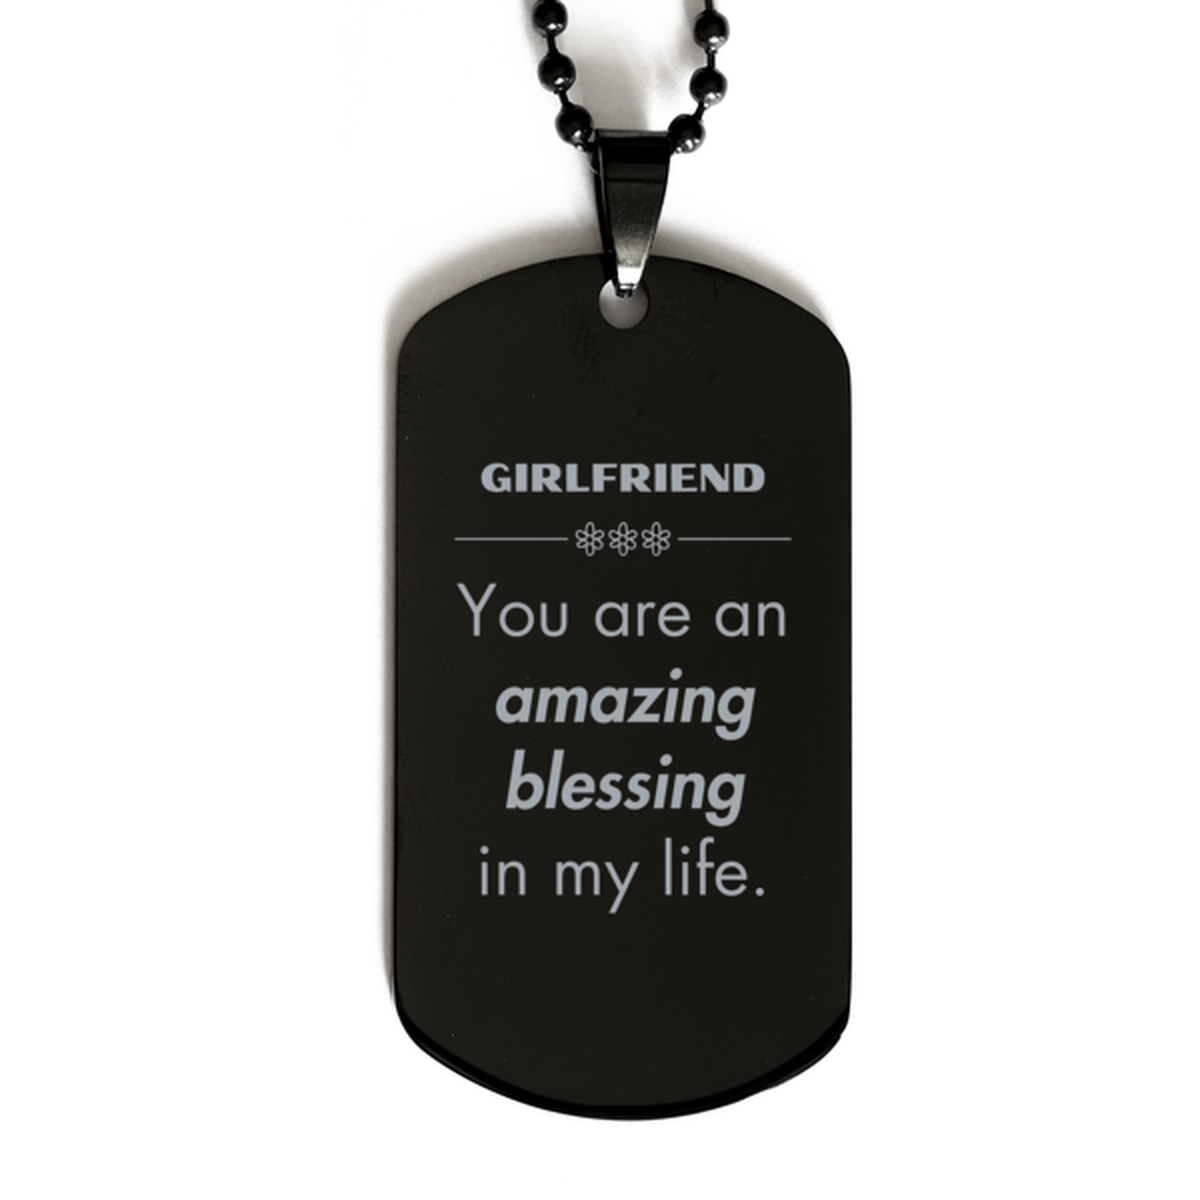 Girlfriend Black Dog Tag, You are an amazing blessing in my life, Thank You Gifts For Girlfriend, Inspirational Birthday Christmas Unique Gifts For Girlfriend